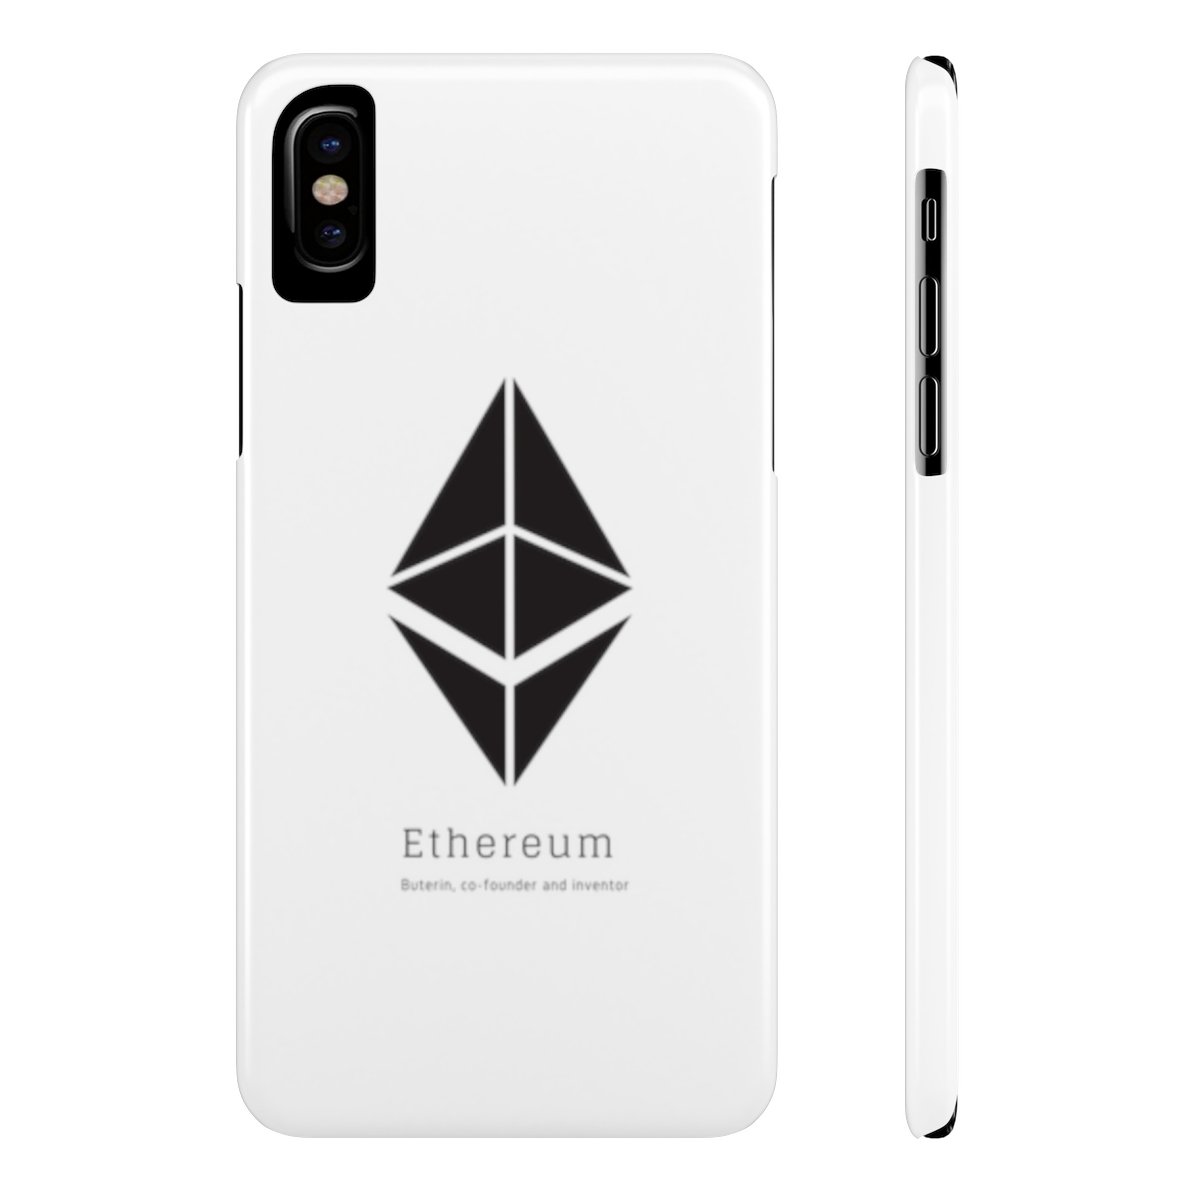 Buterin, co-founder amd inventor - Case Mate Slim Phone Cases TCP1607 iPhone X Slim Official Crypto  Merch